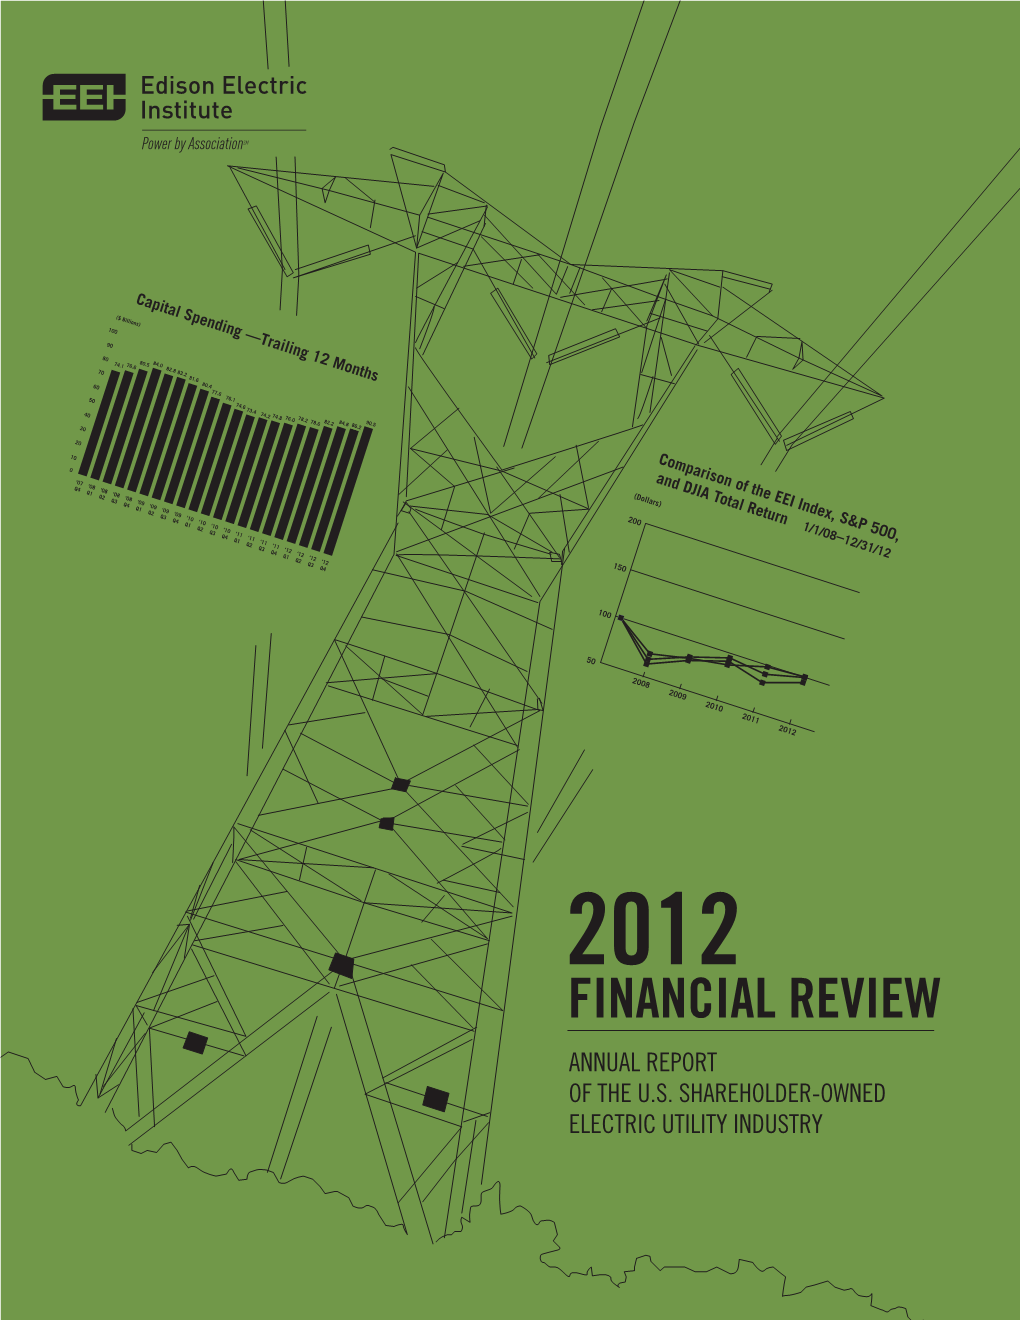 2012 Financial Review Annual Report of the U.S